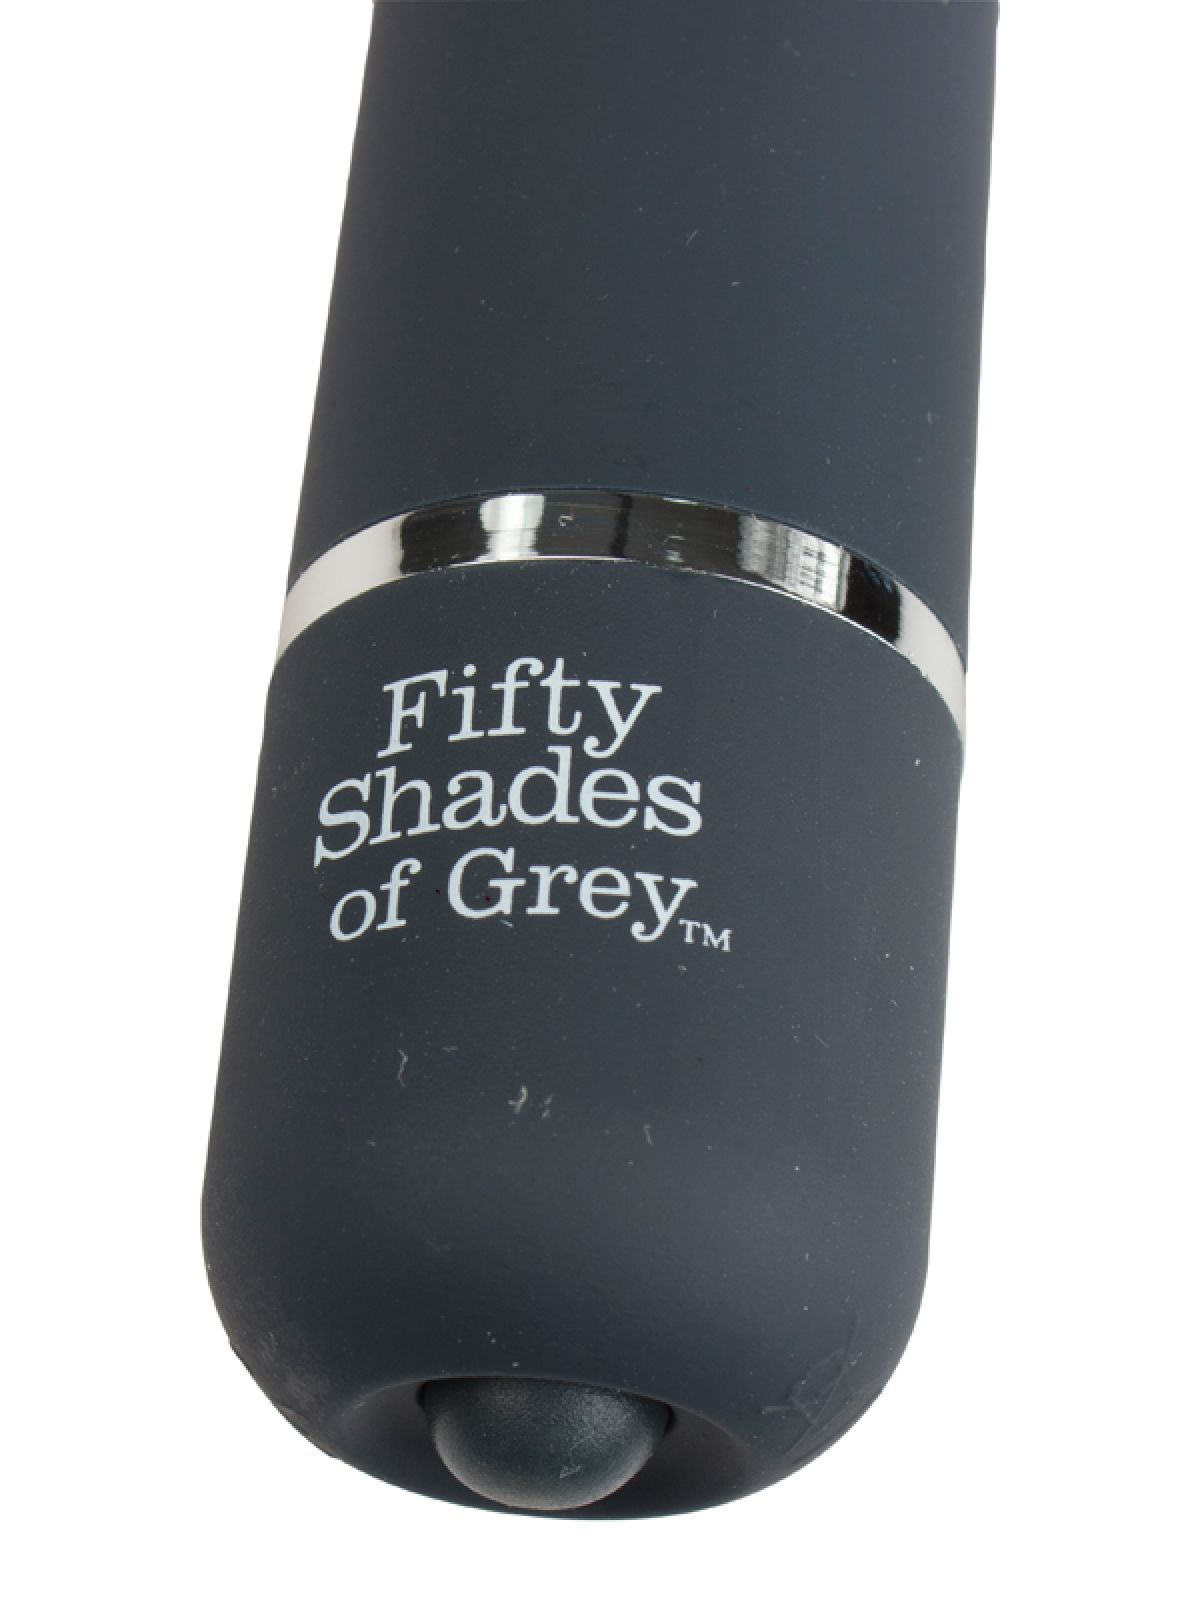 Tango\'&# \'\'Charlie Fifty - SHADES Of vibrator classic-vibrators Grey Shades Klassieke OF FIFTY GREY